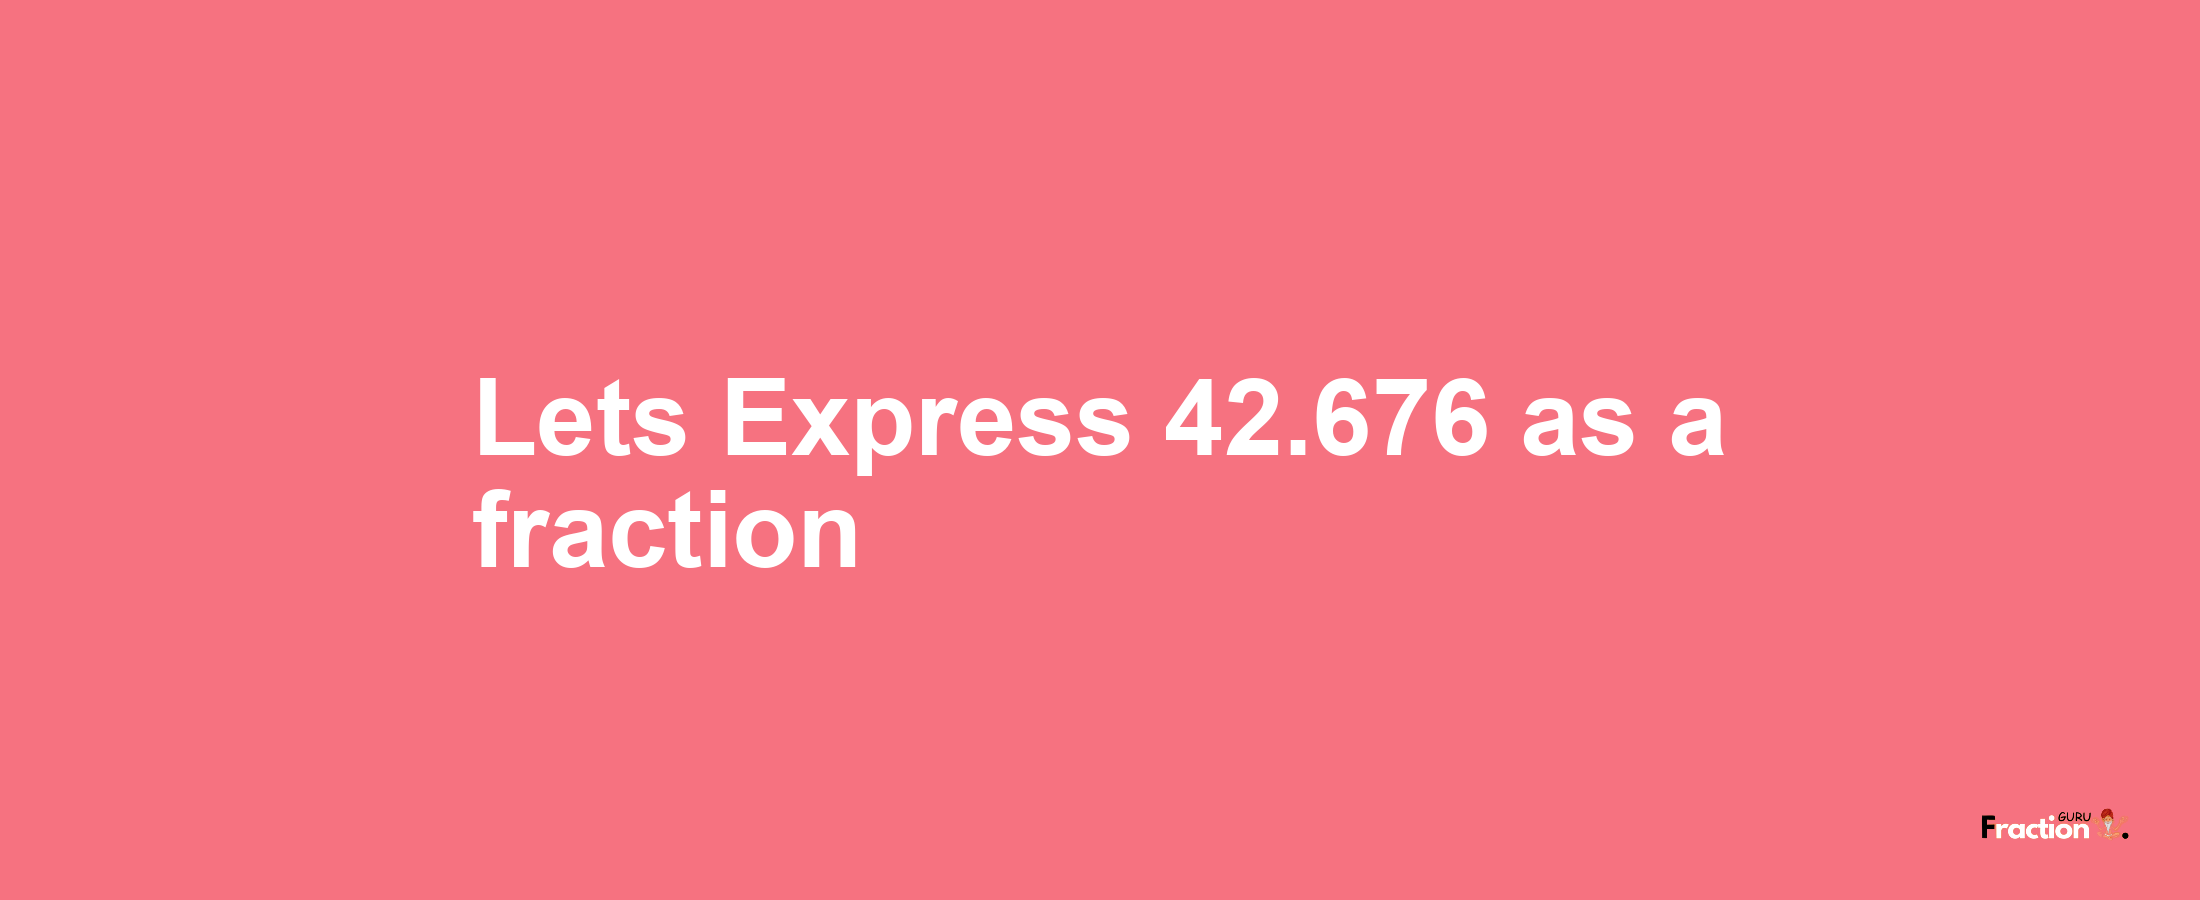 Lets Express 42.676 as afraction